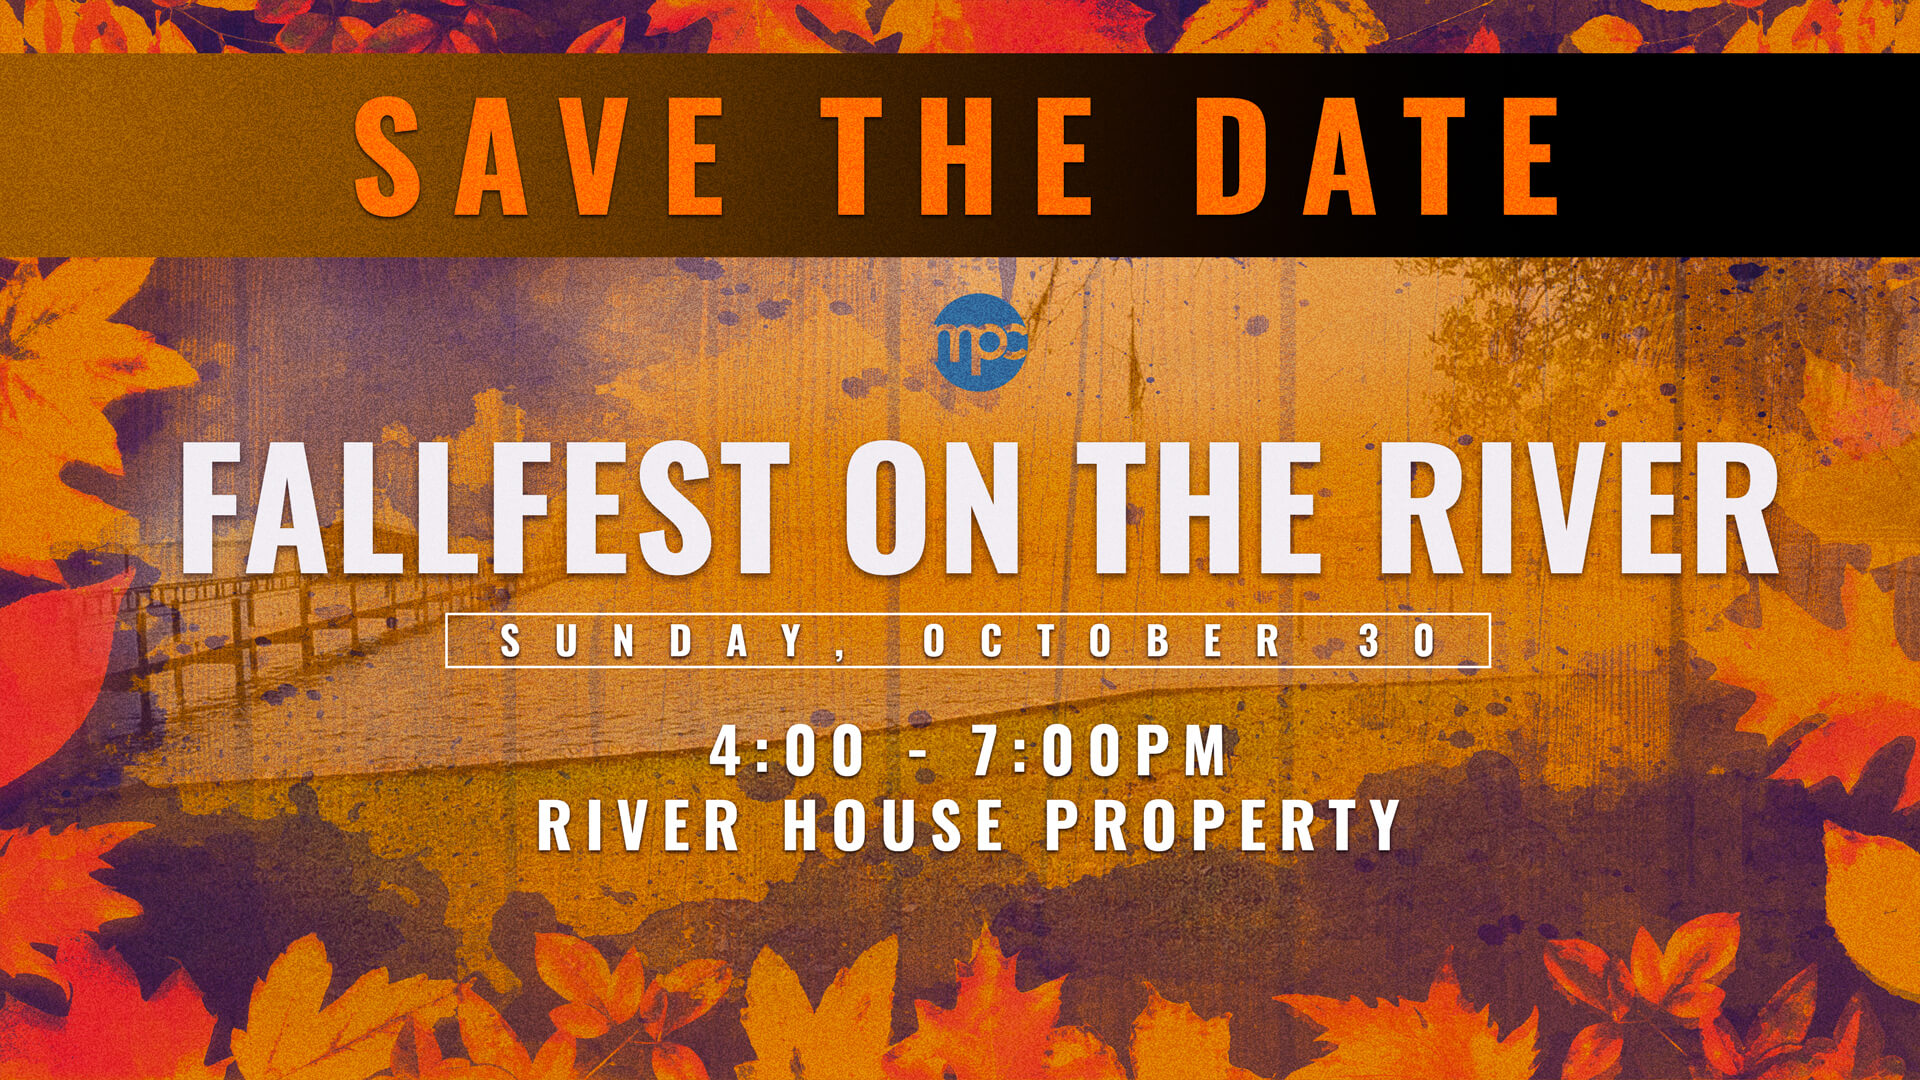 FallFest on the River

October 30 - 4:00 - 7:00pm. An MPC church-wide event!
